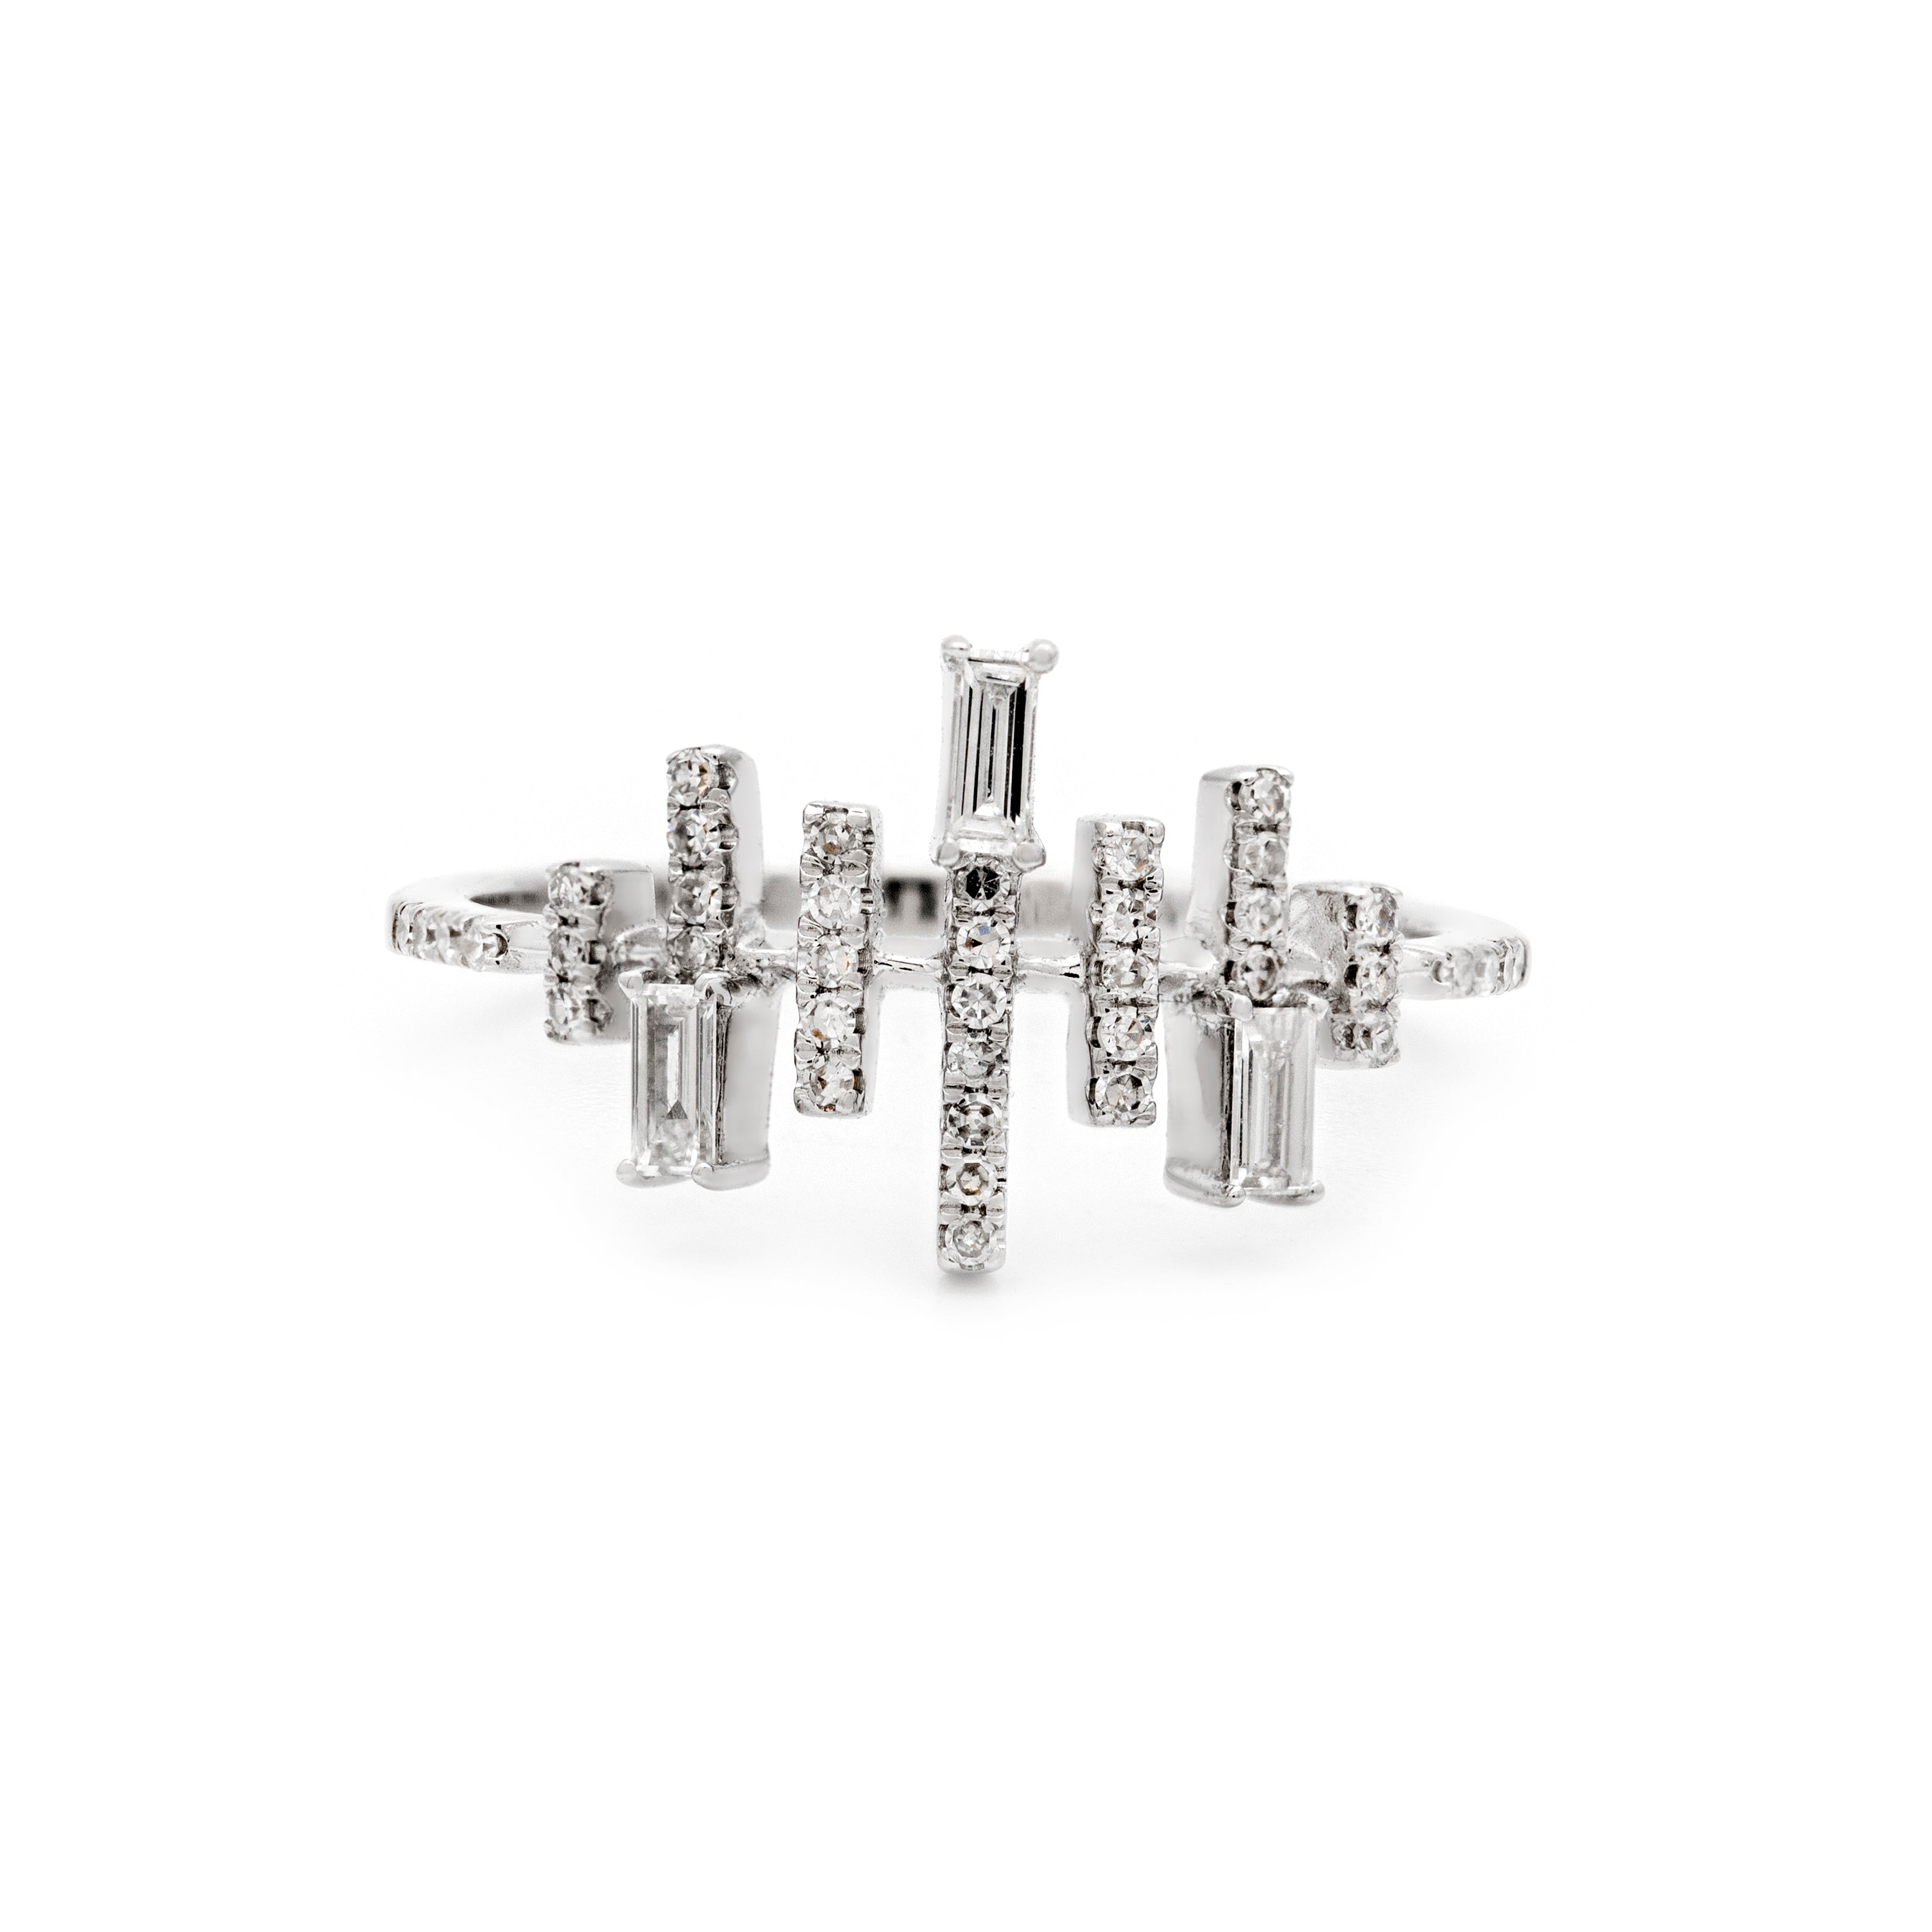 Rows of Pave Diamonds-50% OFF!